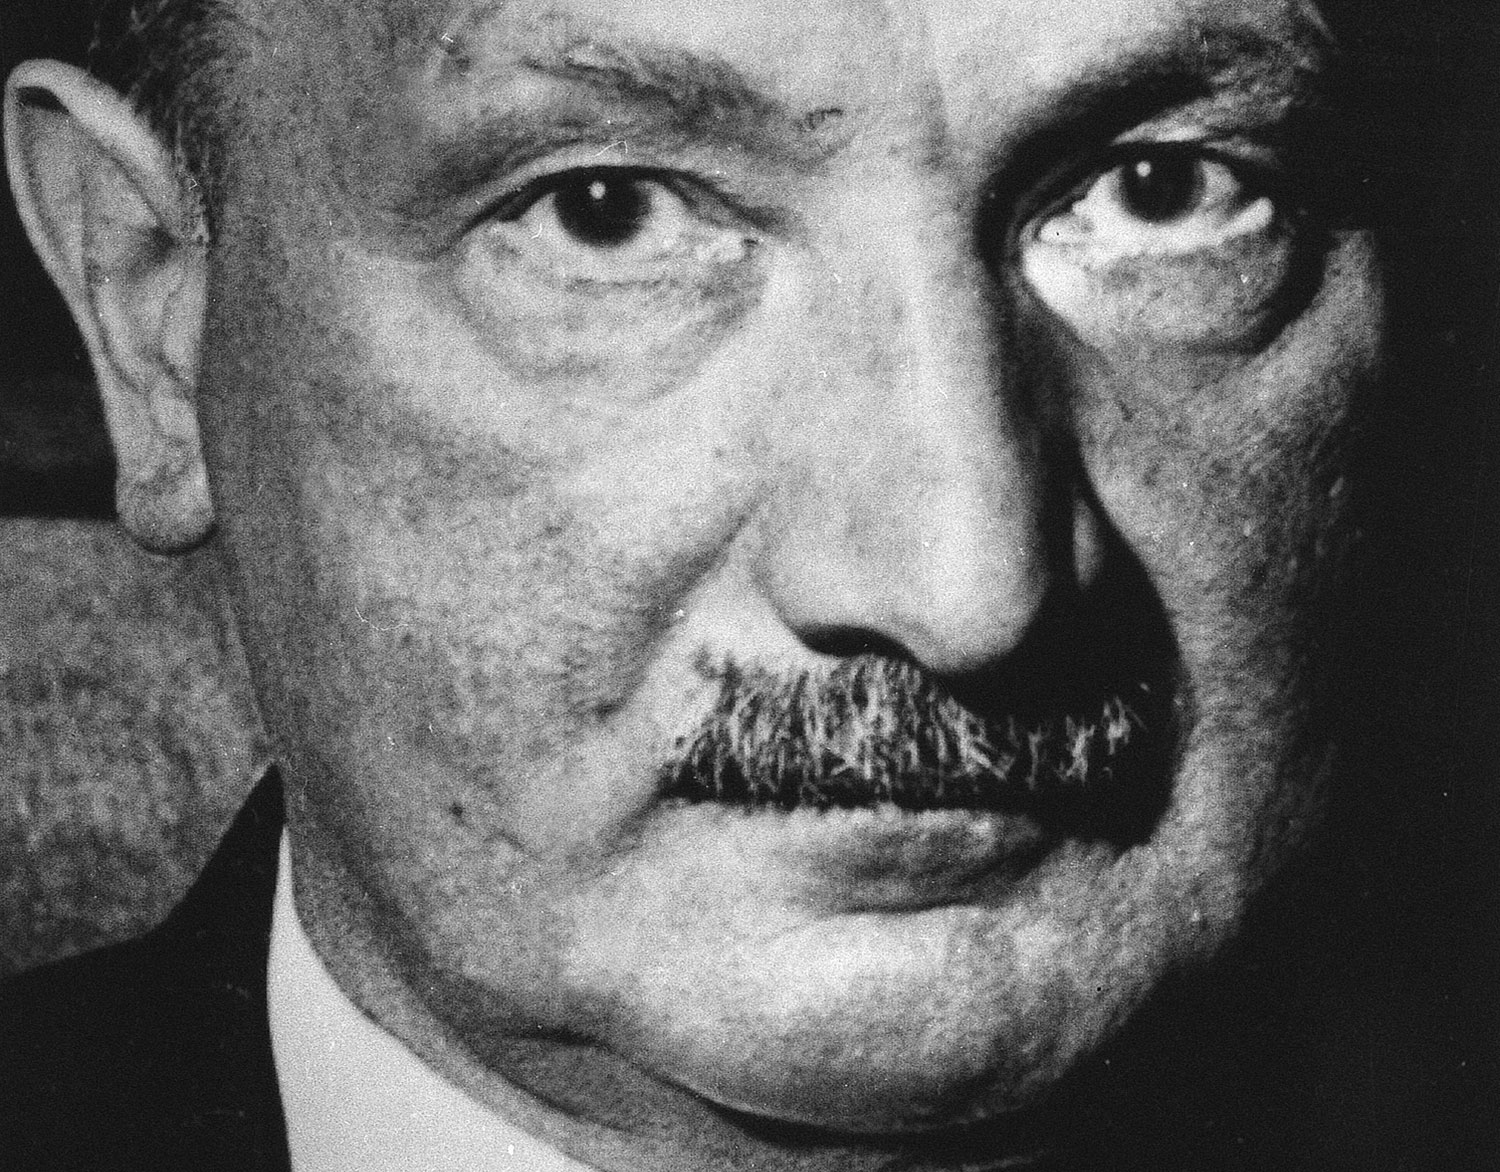 We Don’t Need Heidegger’s Notebooks to Know That He Was a Despicable Anti-Semite